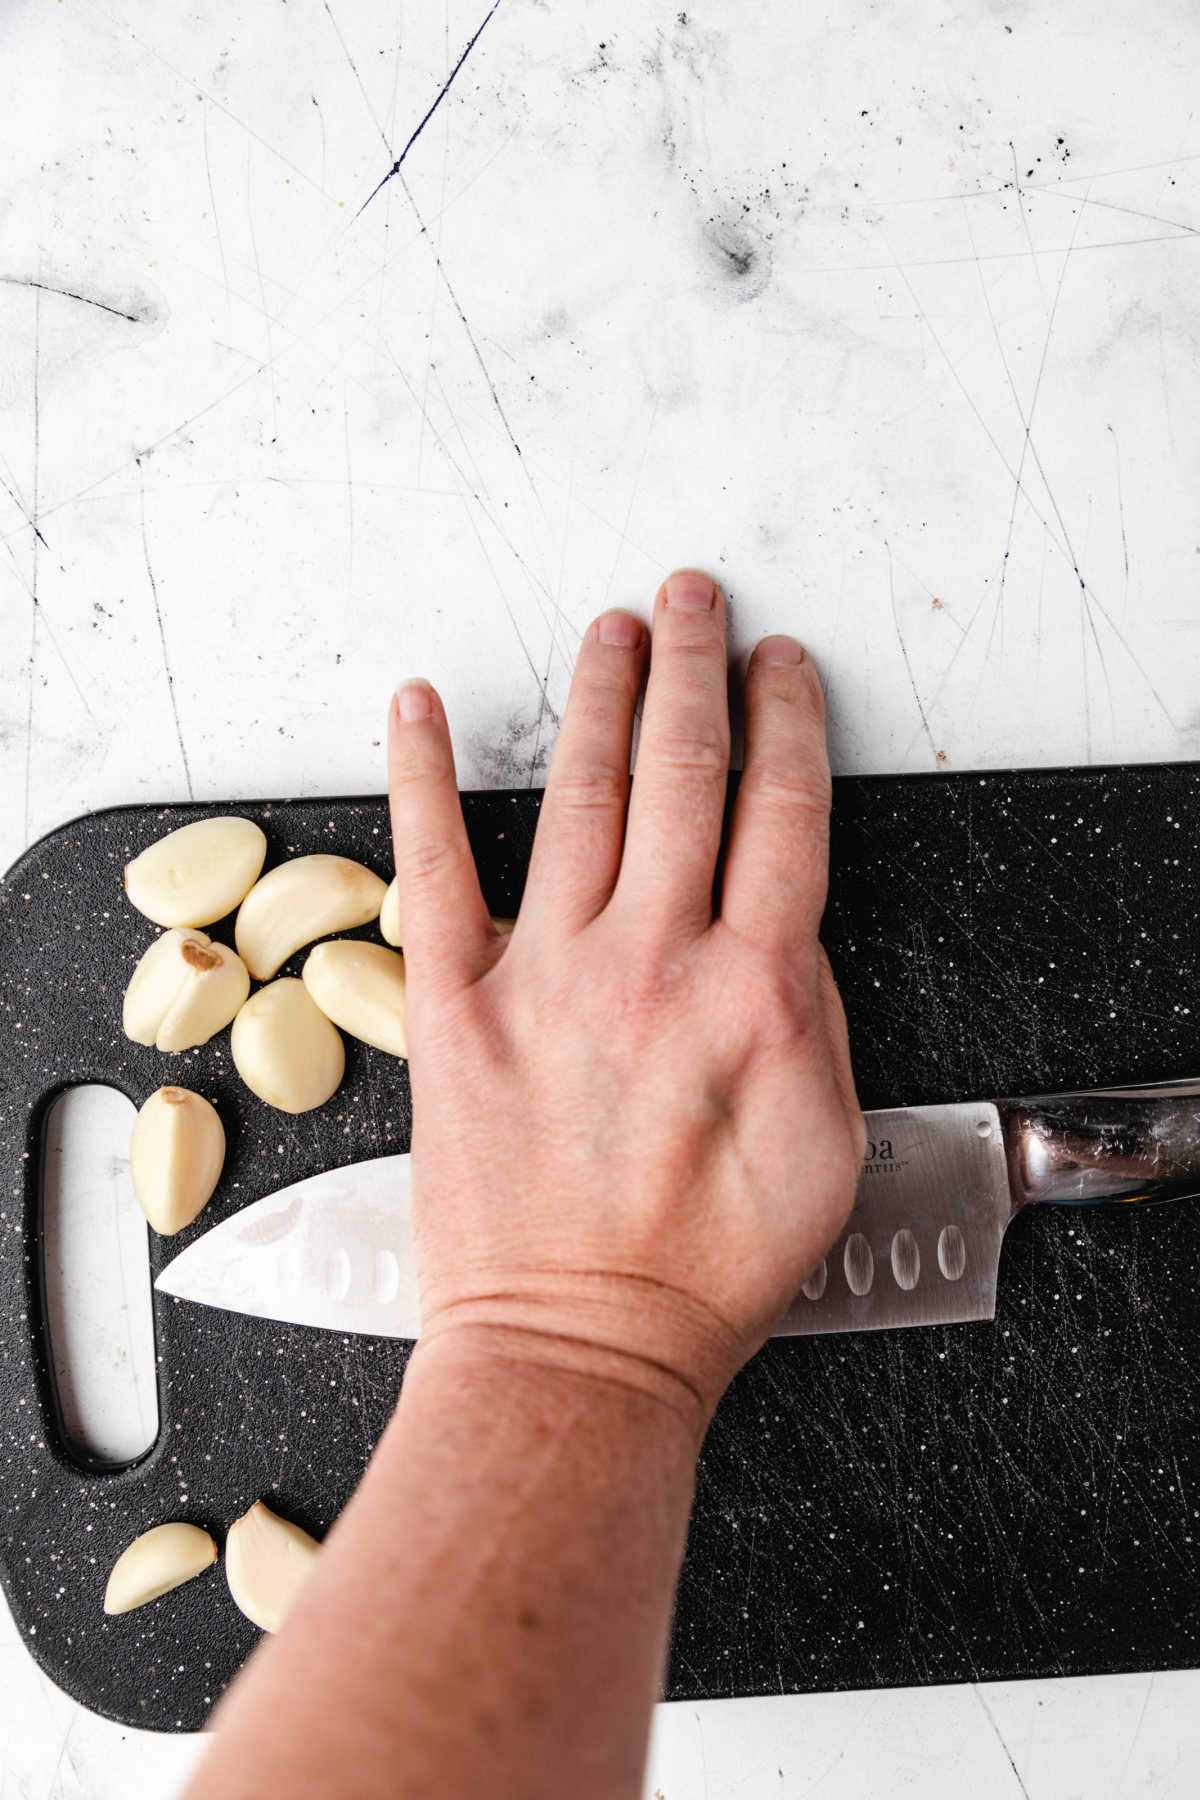 A hand pressing down on a knife to smash a clove of garlic. 